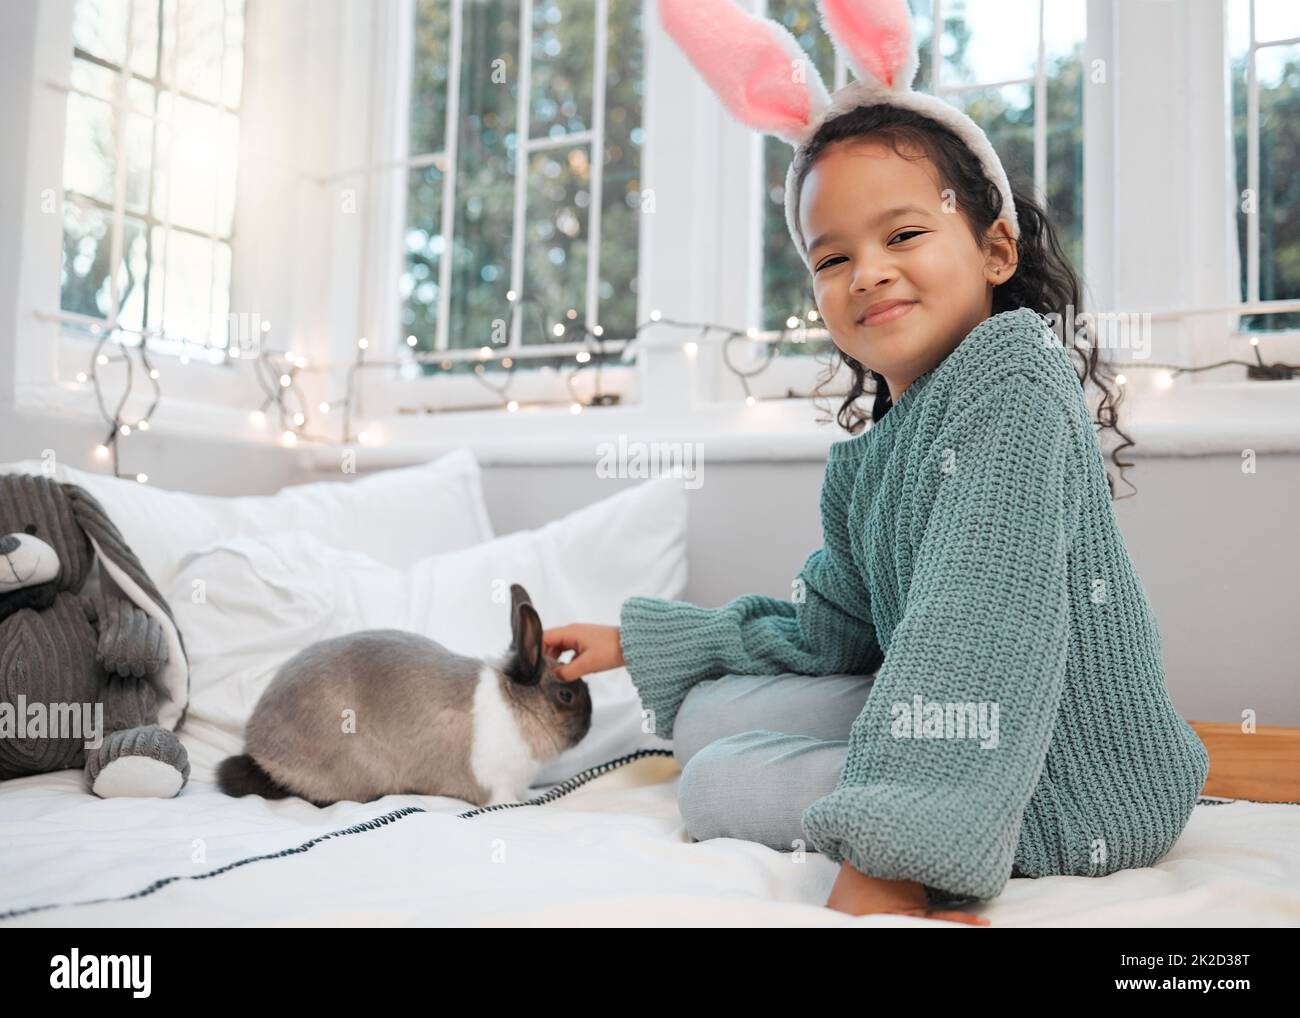 Look, were matching. Shot of an adorable little girl sitting on her bed and bonding with her pet rabbit at home. Stock Photo